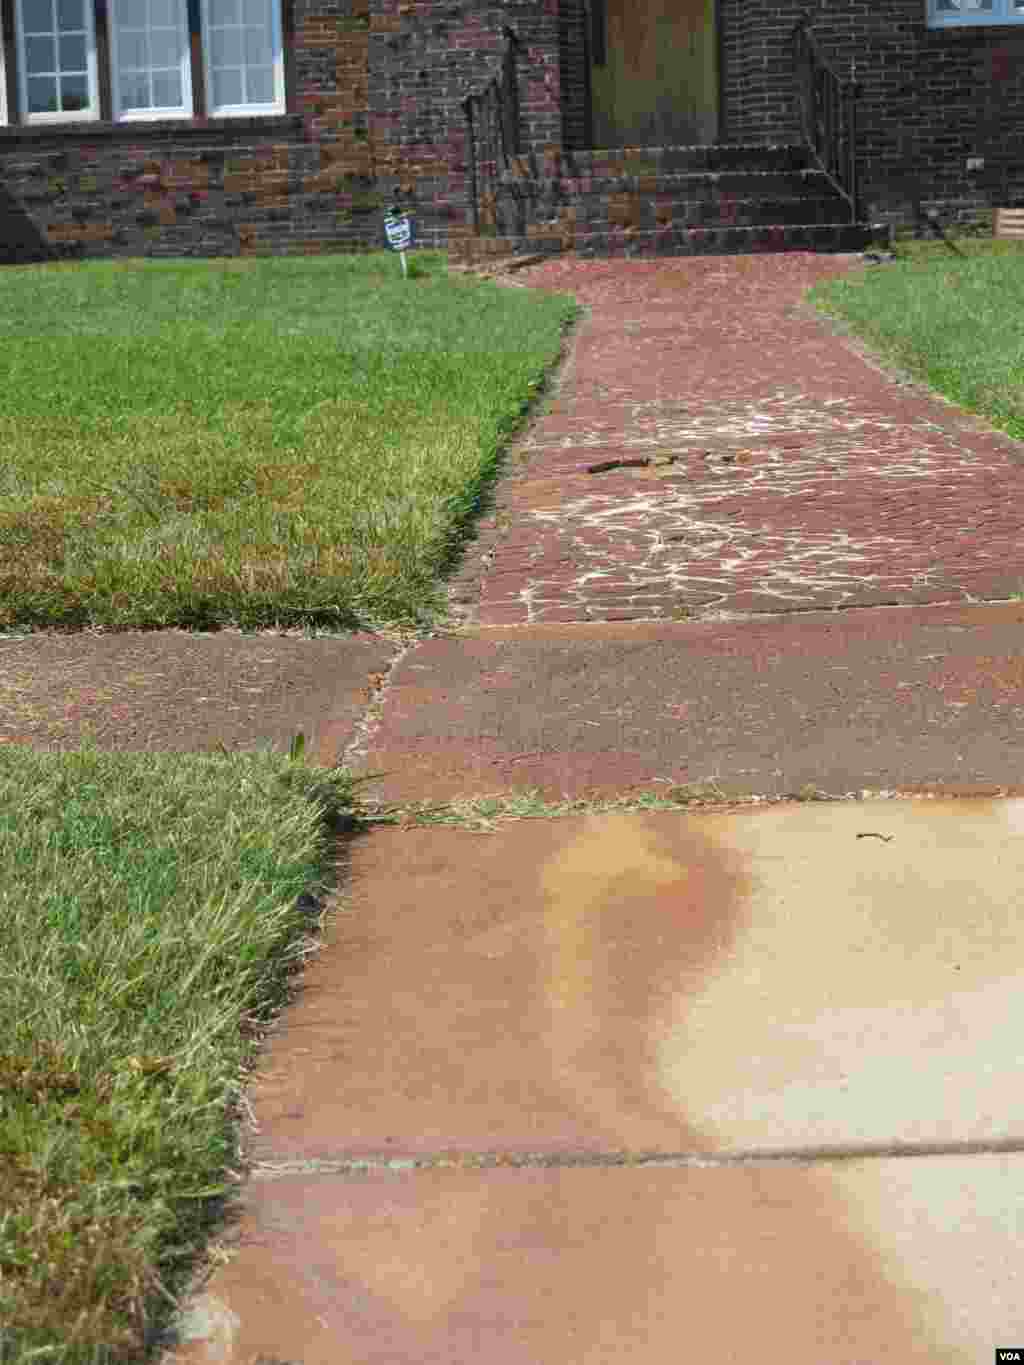 Even when flood water recedes tell-tale stains remain on the sidewalk. (Rosanne Skirble/VOA) 